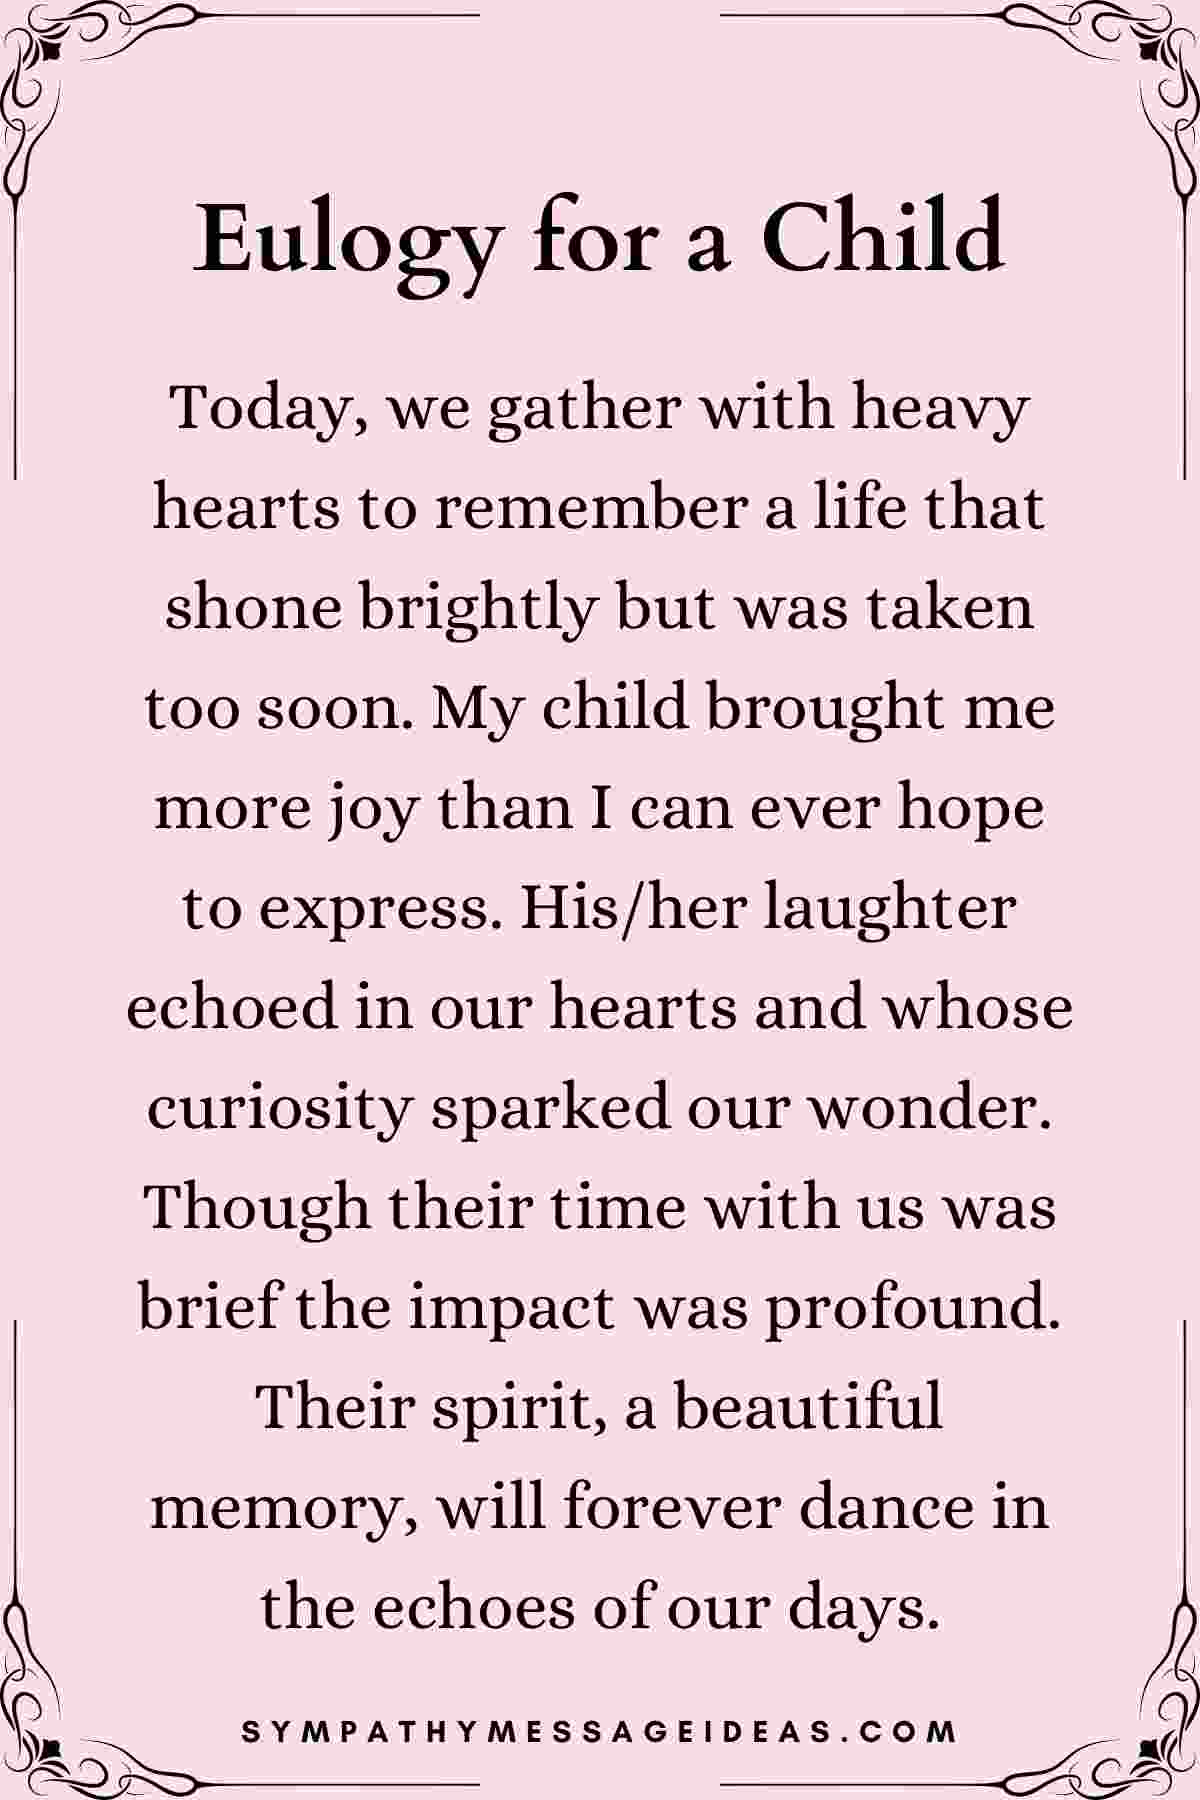 short example eulogy for child